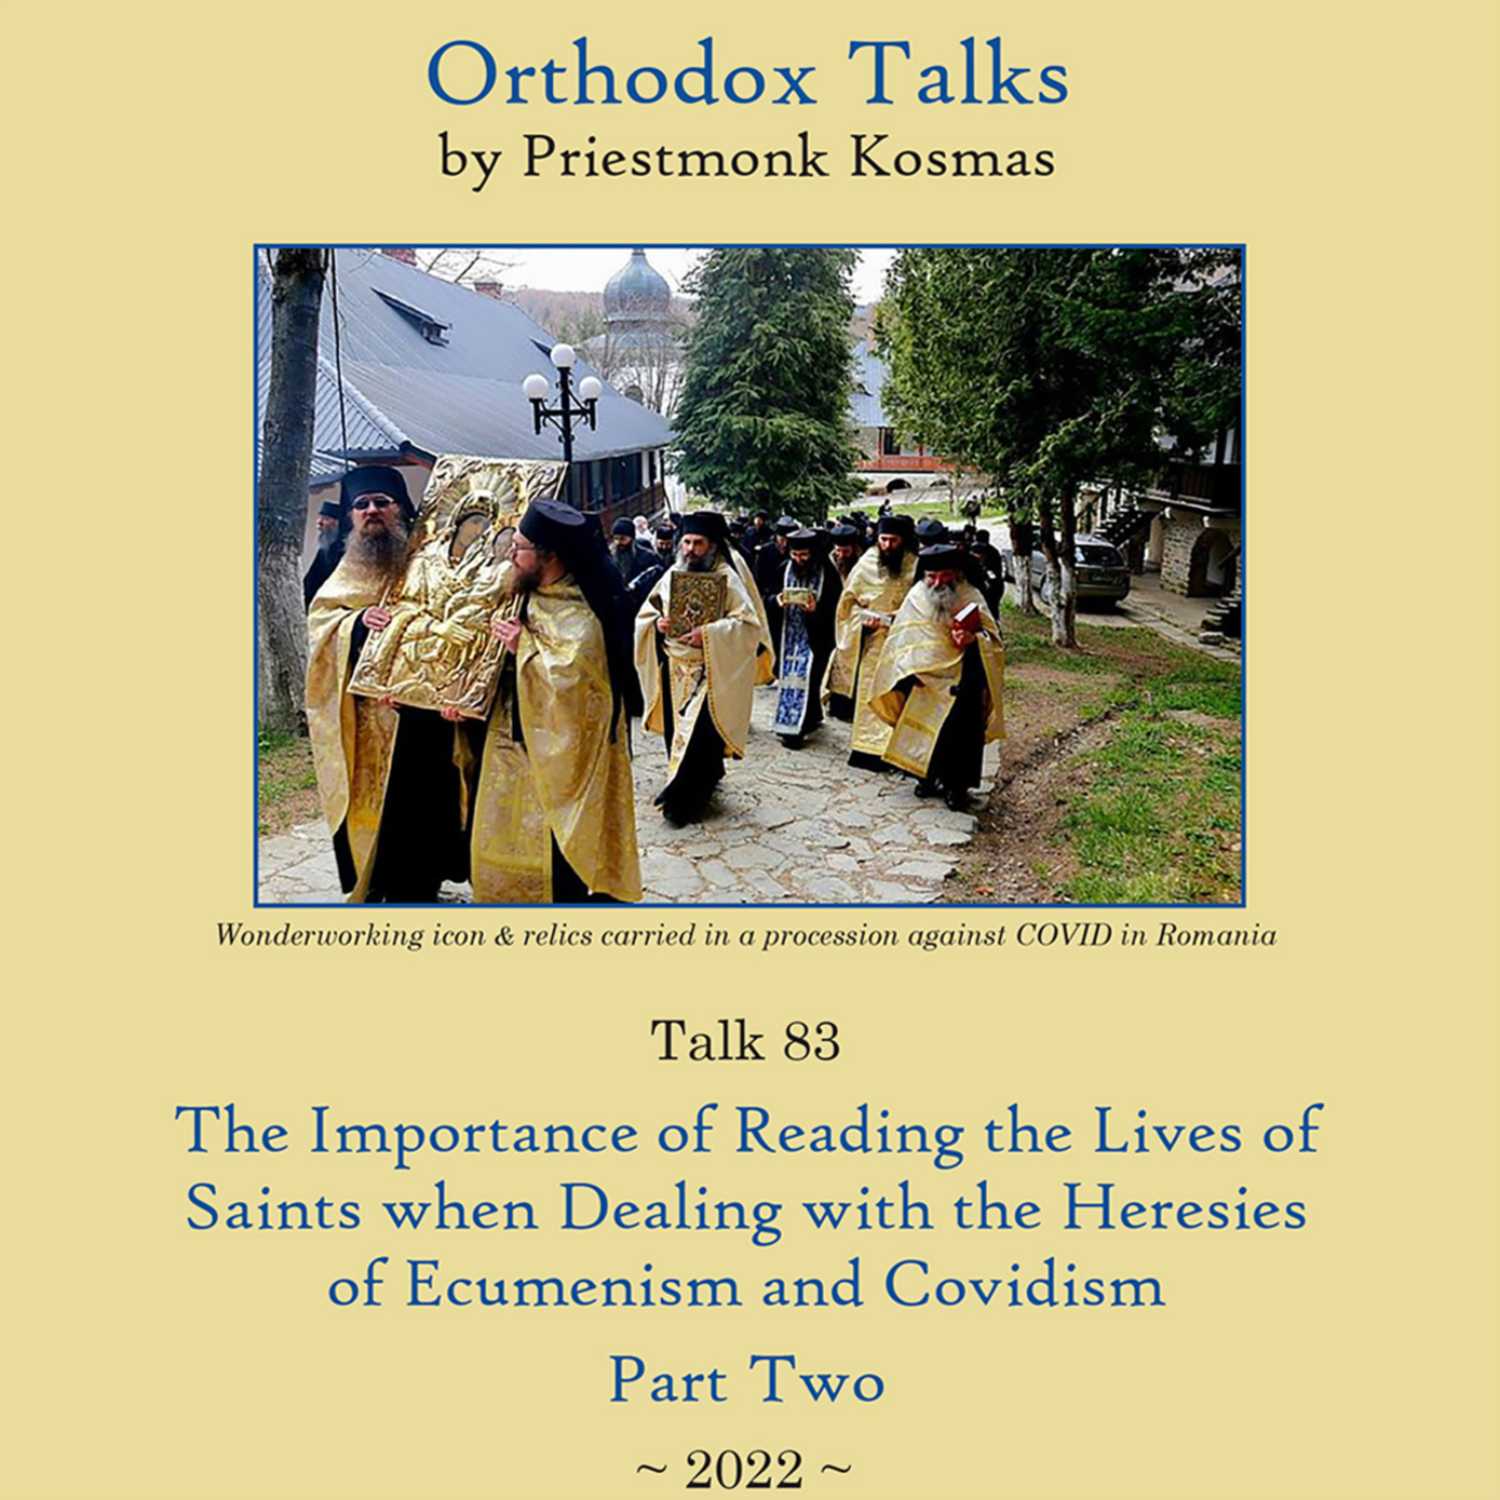 Talk 83: The Importance of Reading the Lives of Saints when Dealing with the Heresies of Ecumenism and Covidism - Part 2